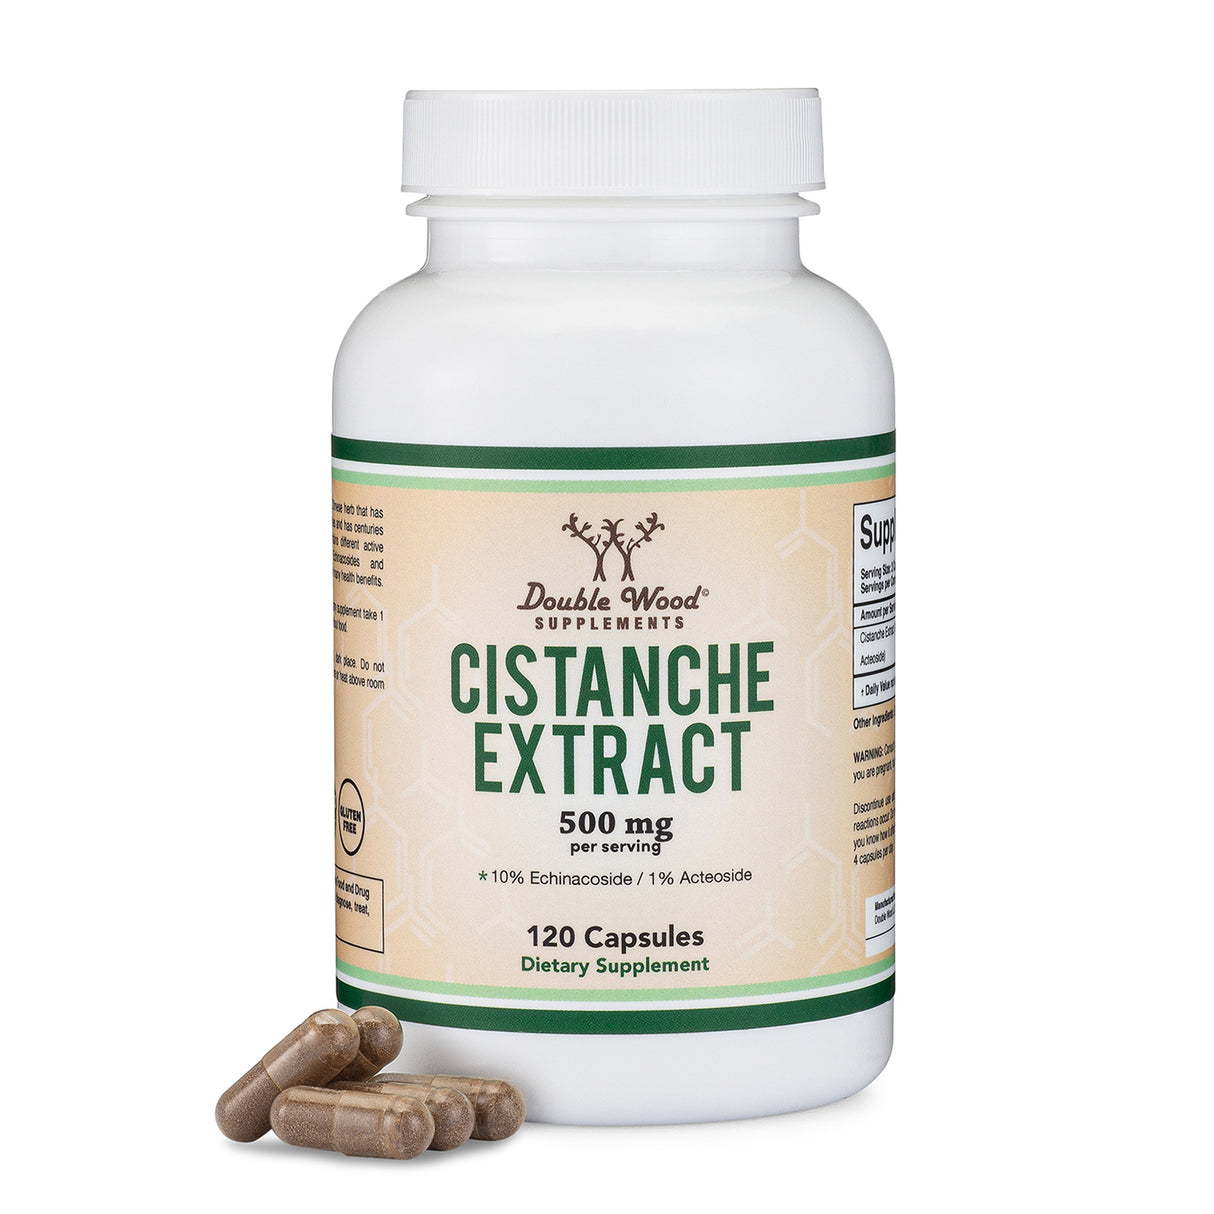 Cistanche Extract